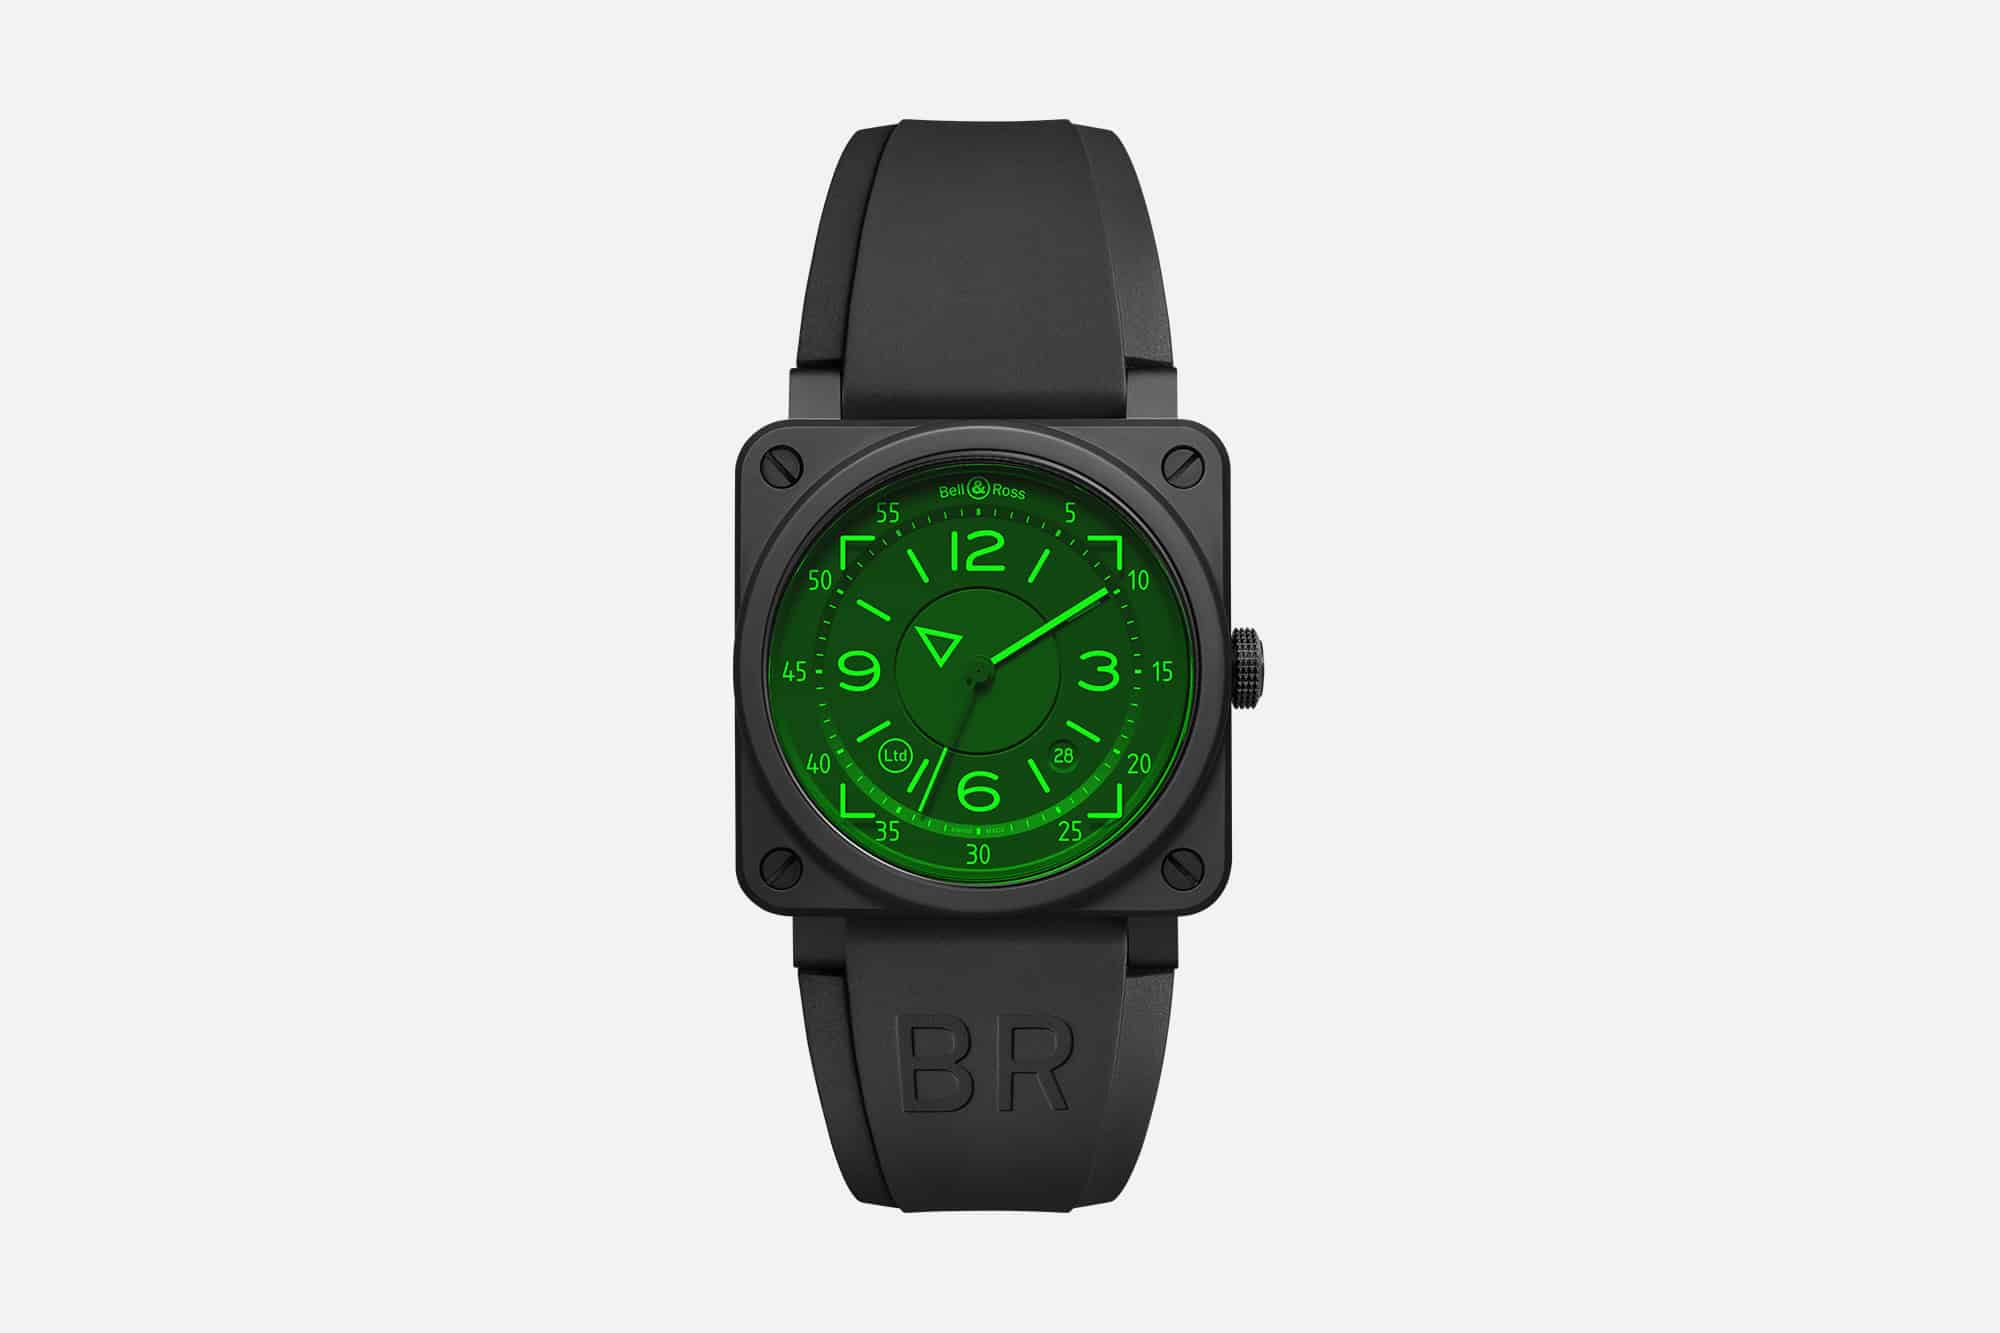 Bell & Ross Replicate a Fighter Jet’s HUD in their Latest Limited Edition